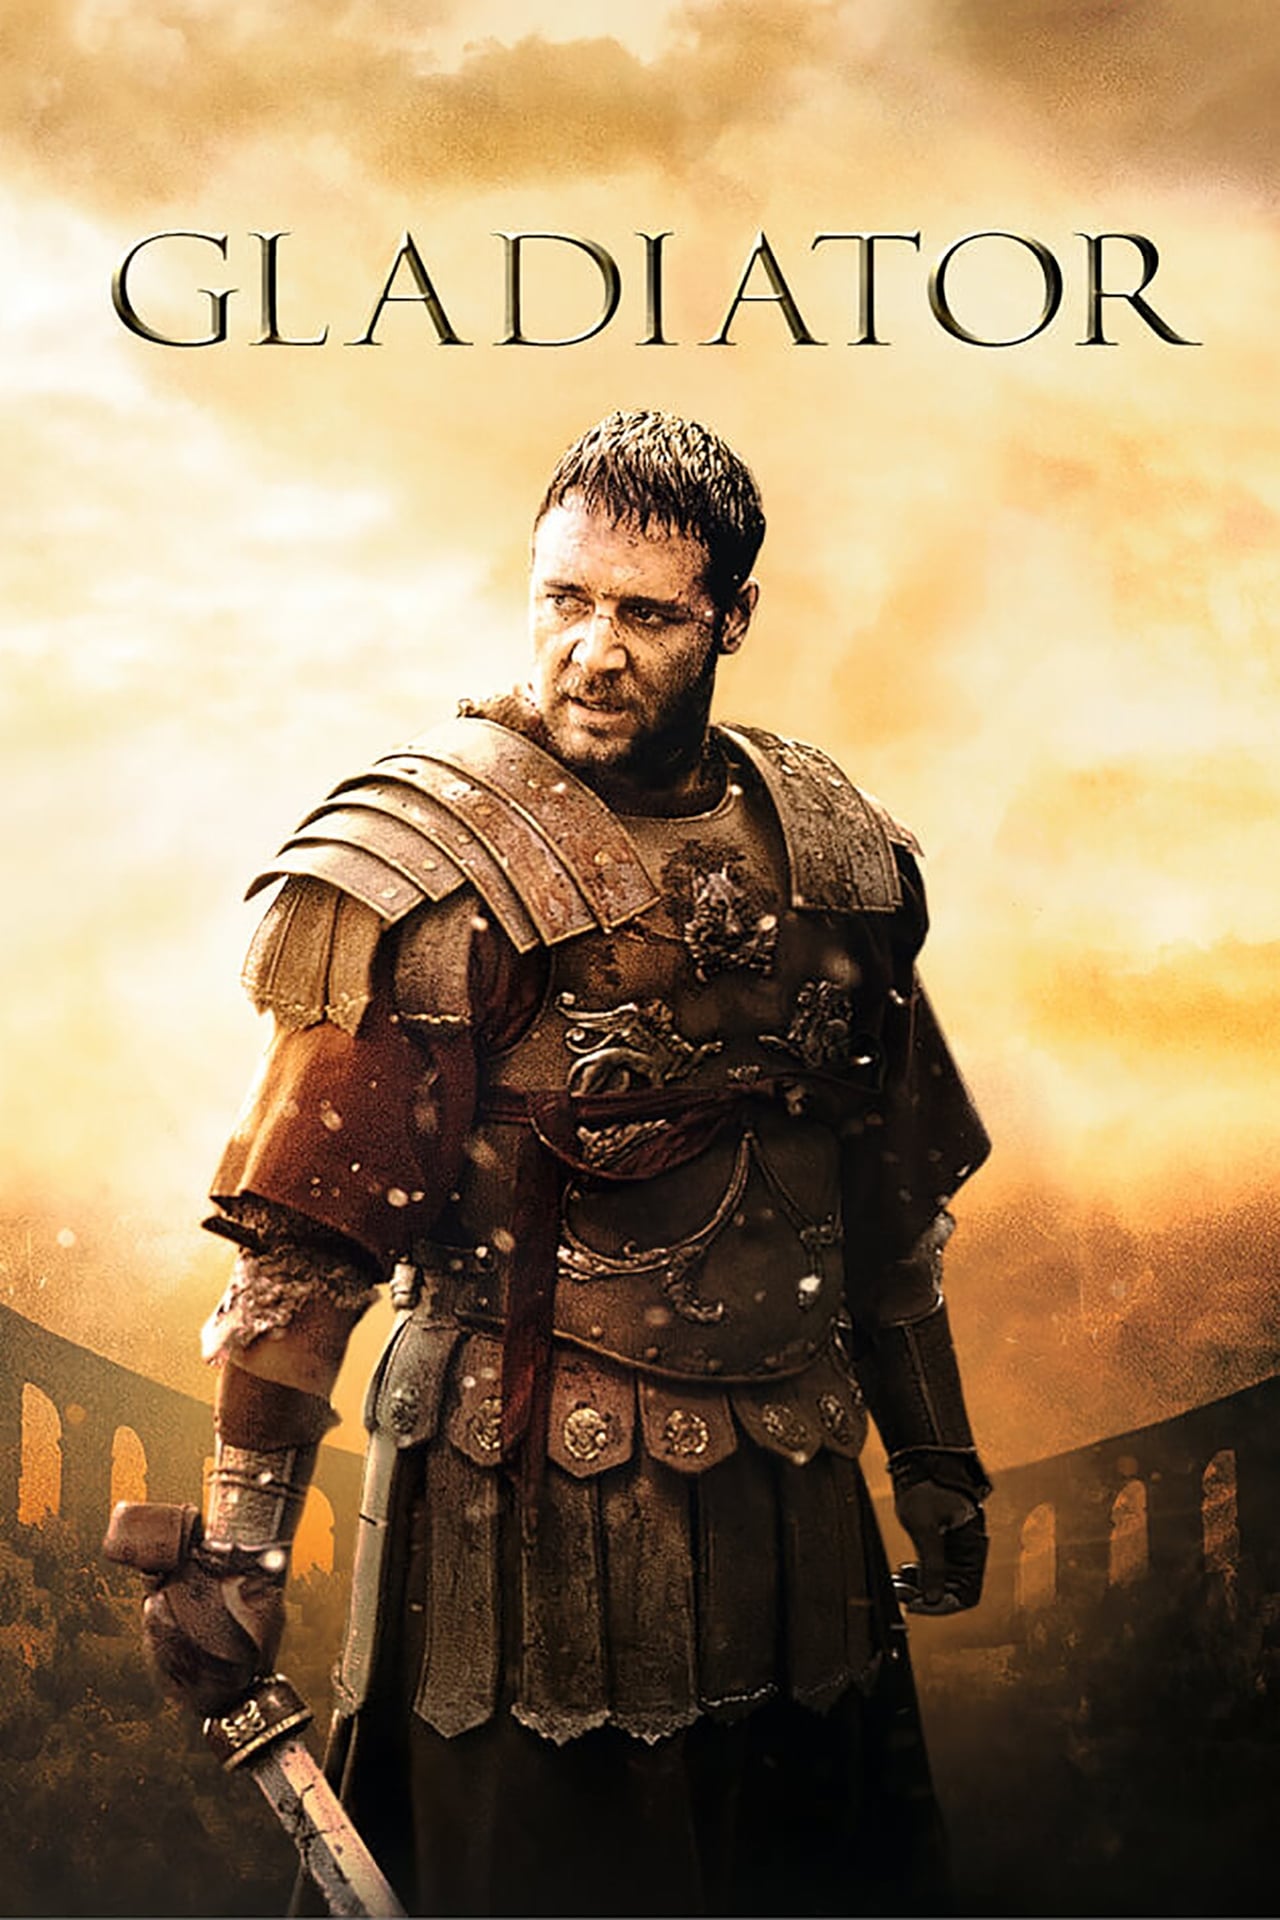 Gladiator (1992) wiki, synopsis, reviews, watch and download
